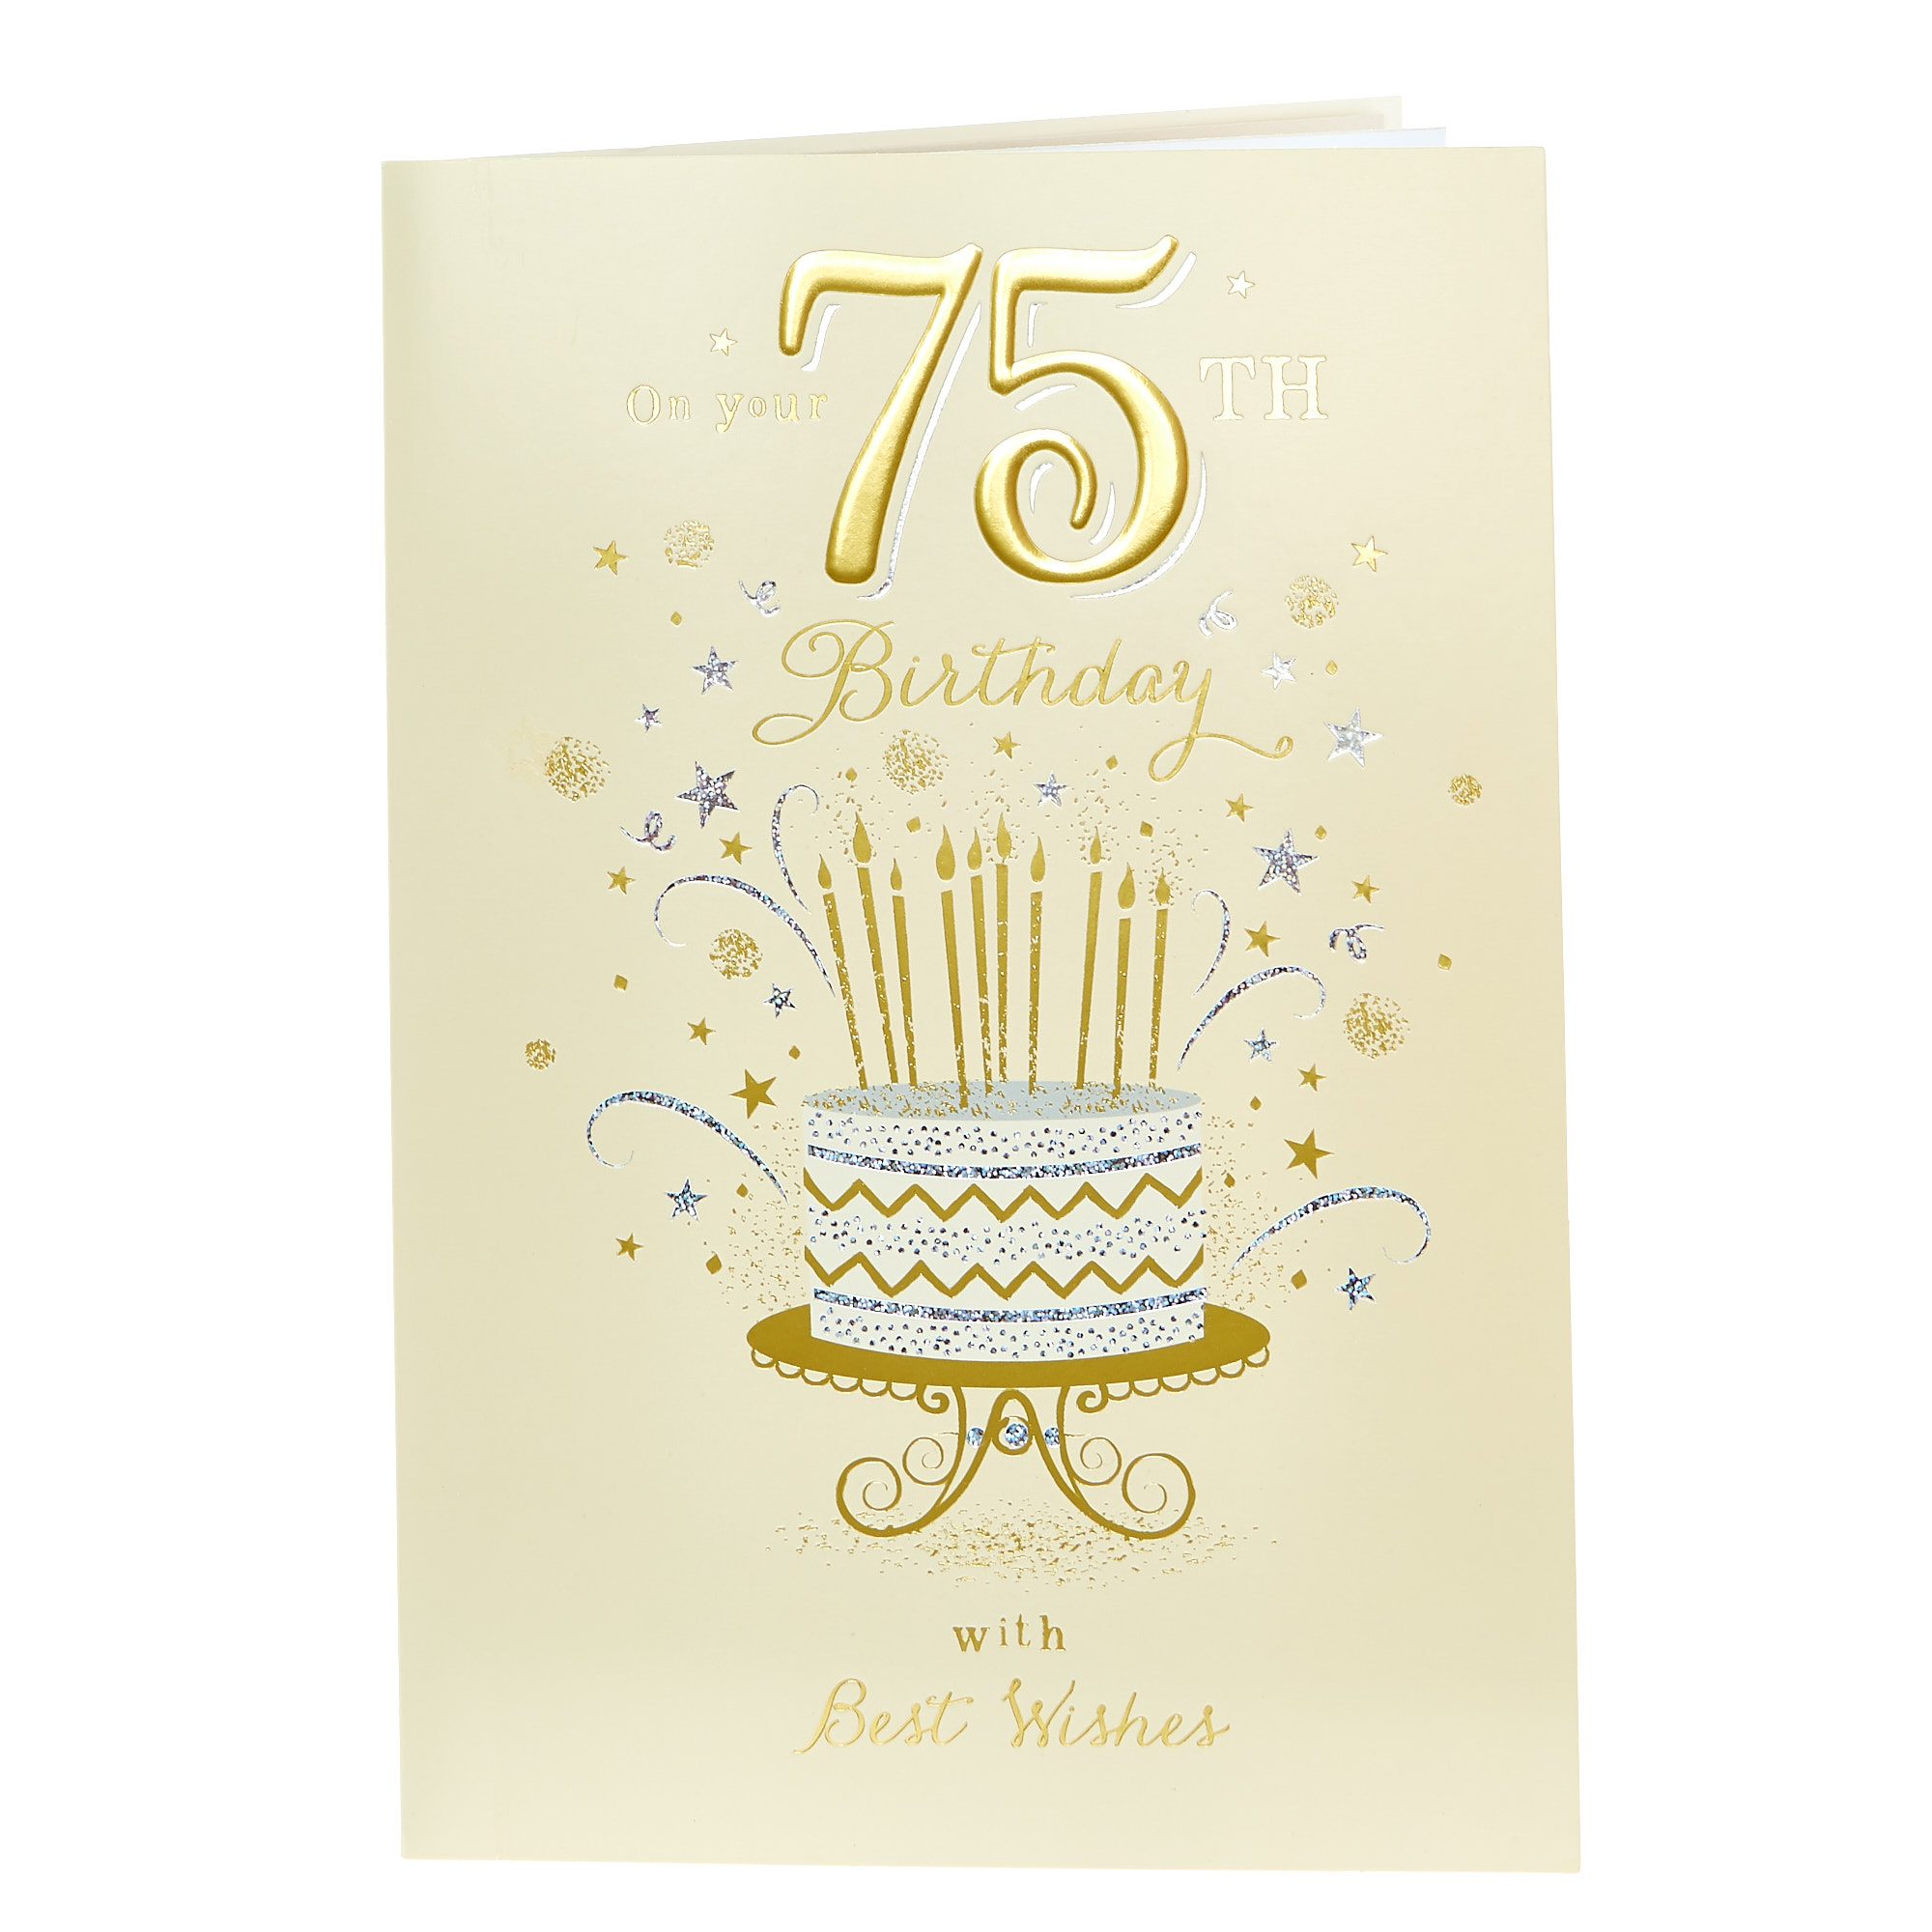 75th Birthday Card - With Best Wishes